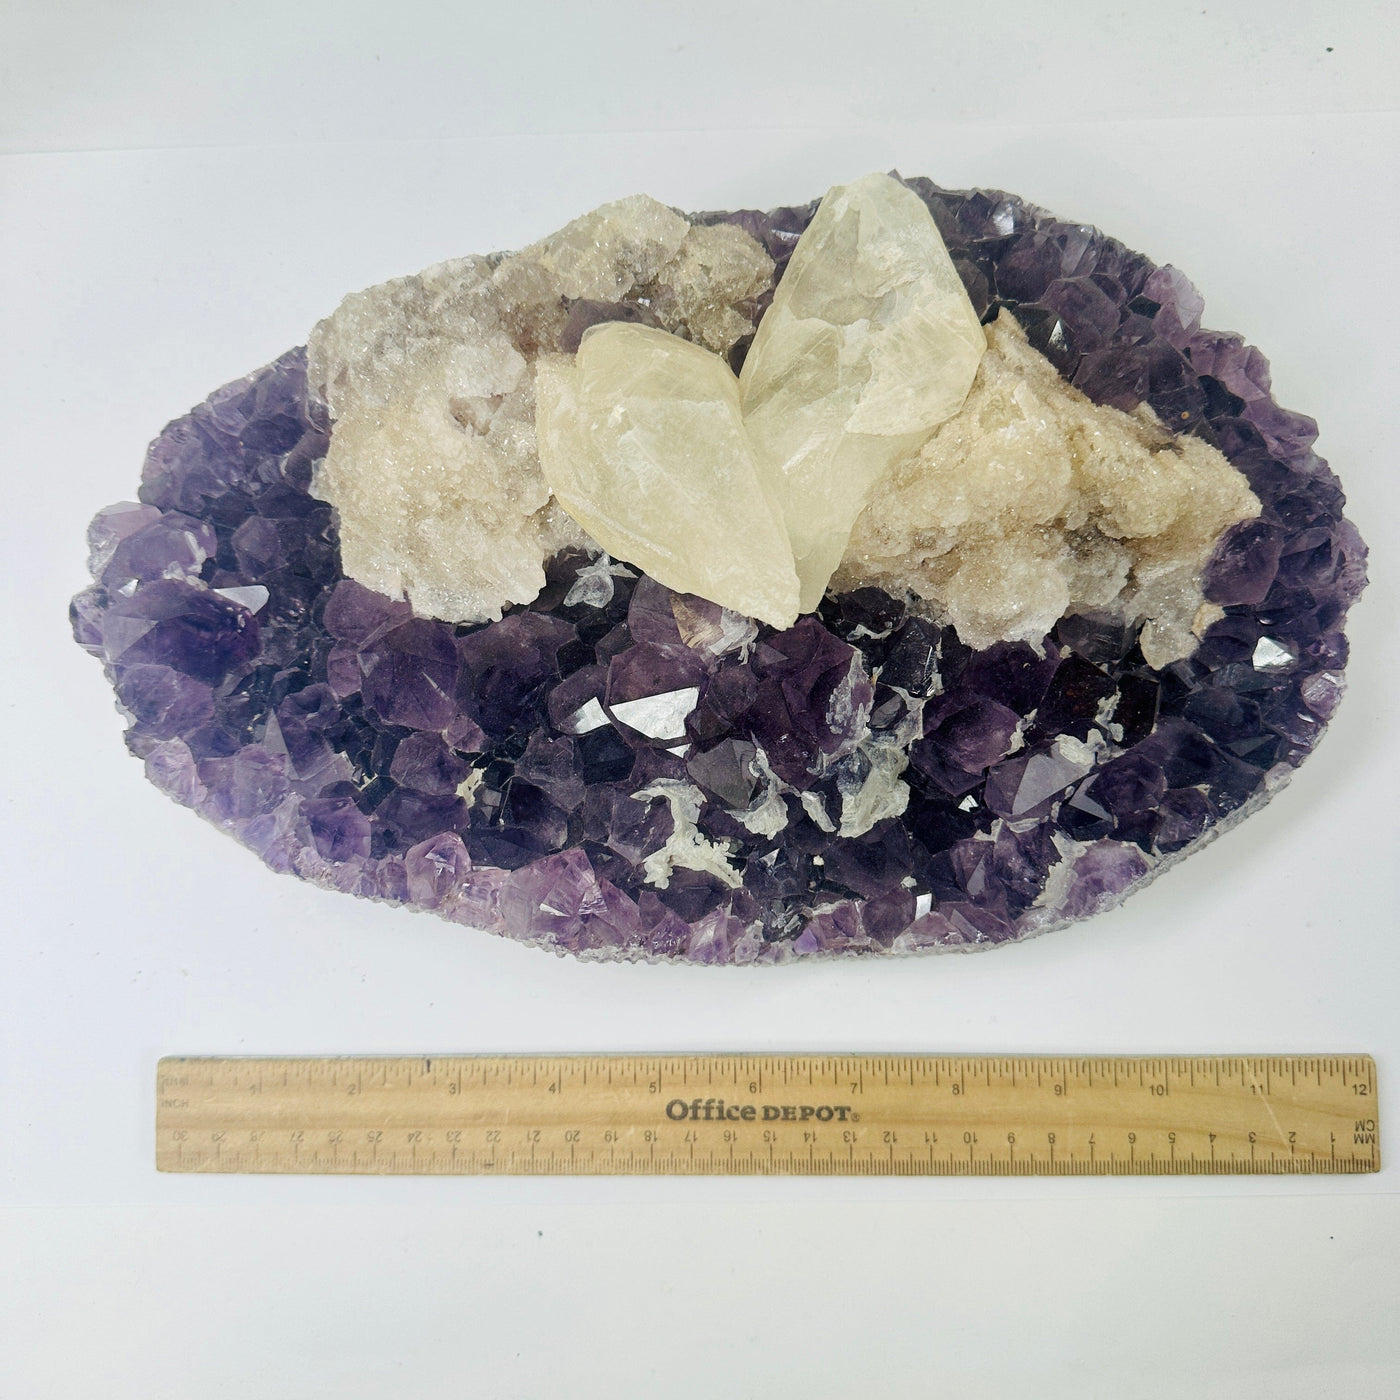 Amethyst Cluster with Crystal Quartz - Large High Quality Amethyst - You Choose variant C with ruler for size reference